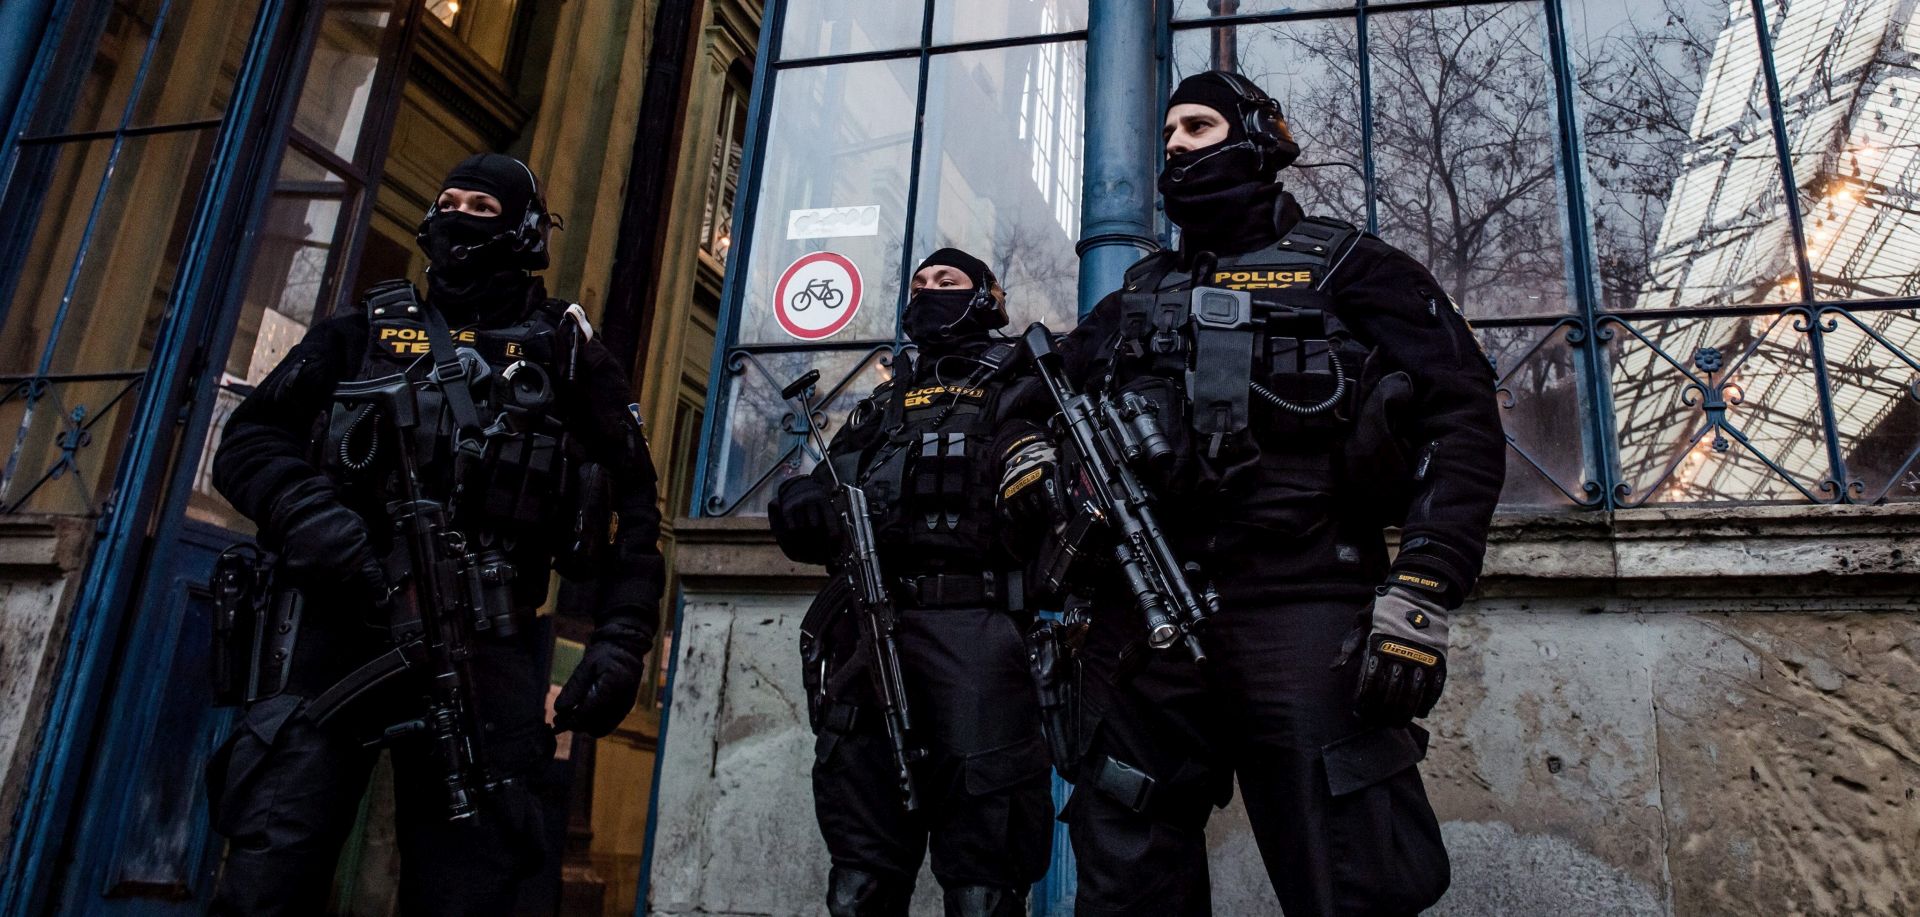 epa05683613 Police officers of the Counter Terrorism Centre with sub-machine guns patrol at Nyugati (Western) Railway Station in central Budapest, Hungary, 20 December 2016. Security has been beefed up at venues visited by large number of people after at least 12 people were killed and dozens injured when a truck on 19 December drove into the Christmas market at Breitscheidplatz in Berlin, in what authorities believe was a deliberate attack.  EPA/Zoltan Balogh HUNGARY OUT